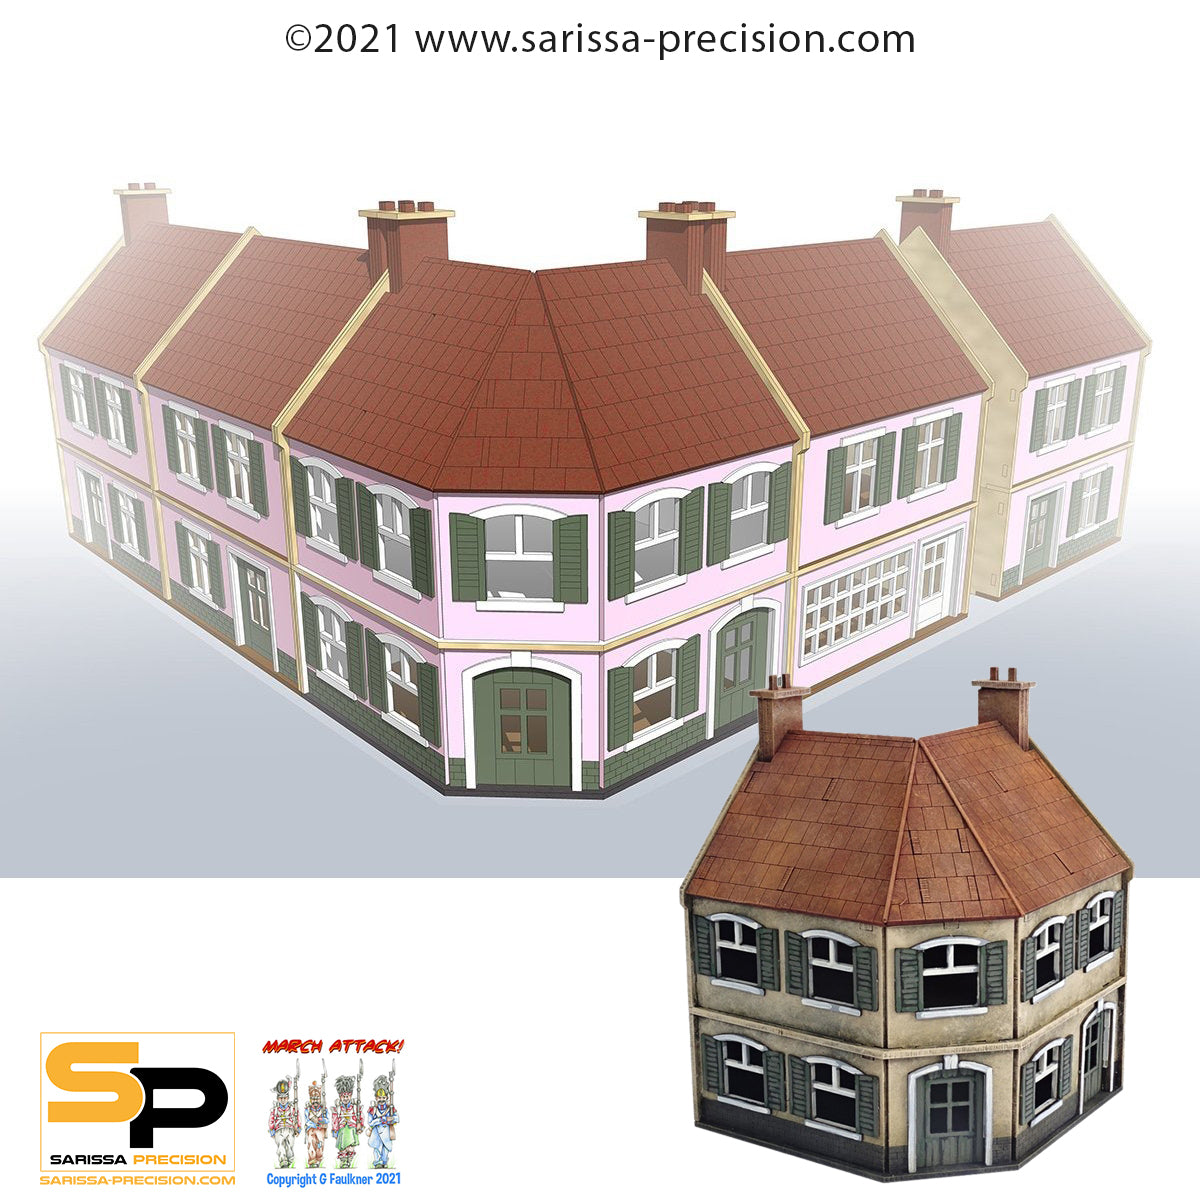 Town Scenery Set (28mm)